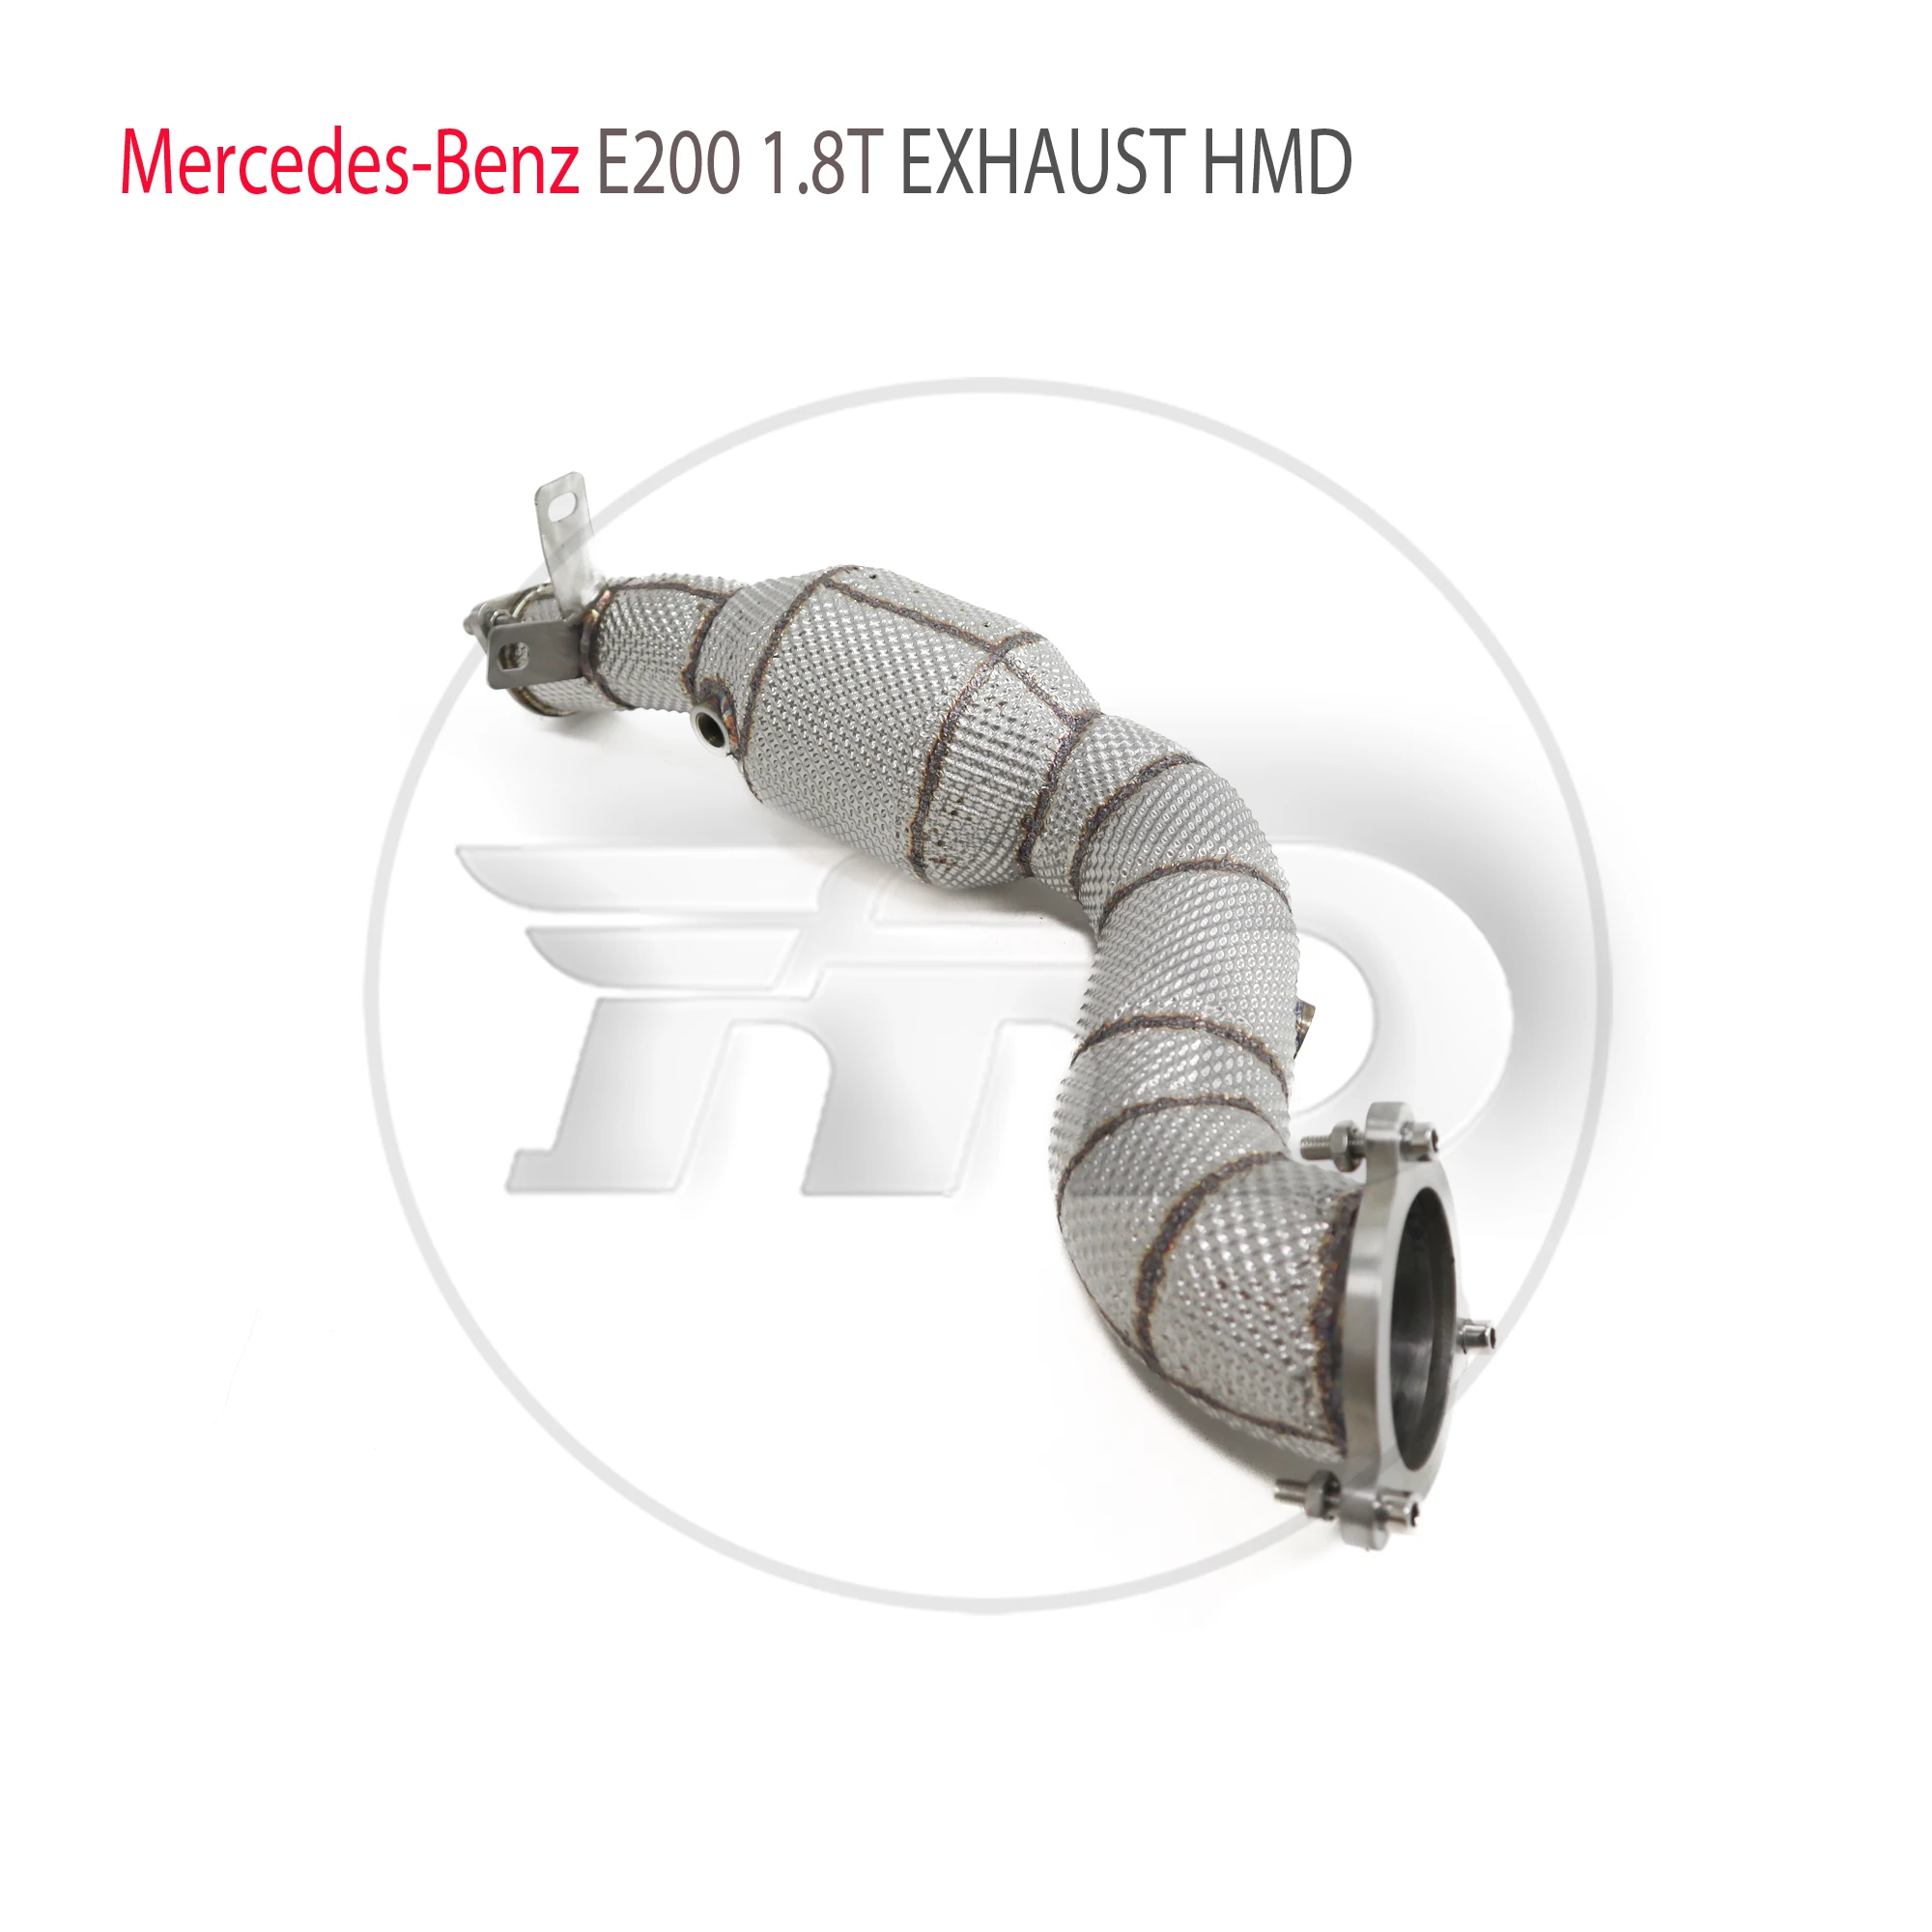 

HMD Exhaust System High Flow Performance Downpipe for Mercedes Benz E200 W212 1.8T With Catalytic Converter Header